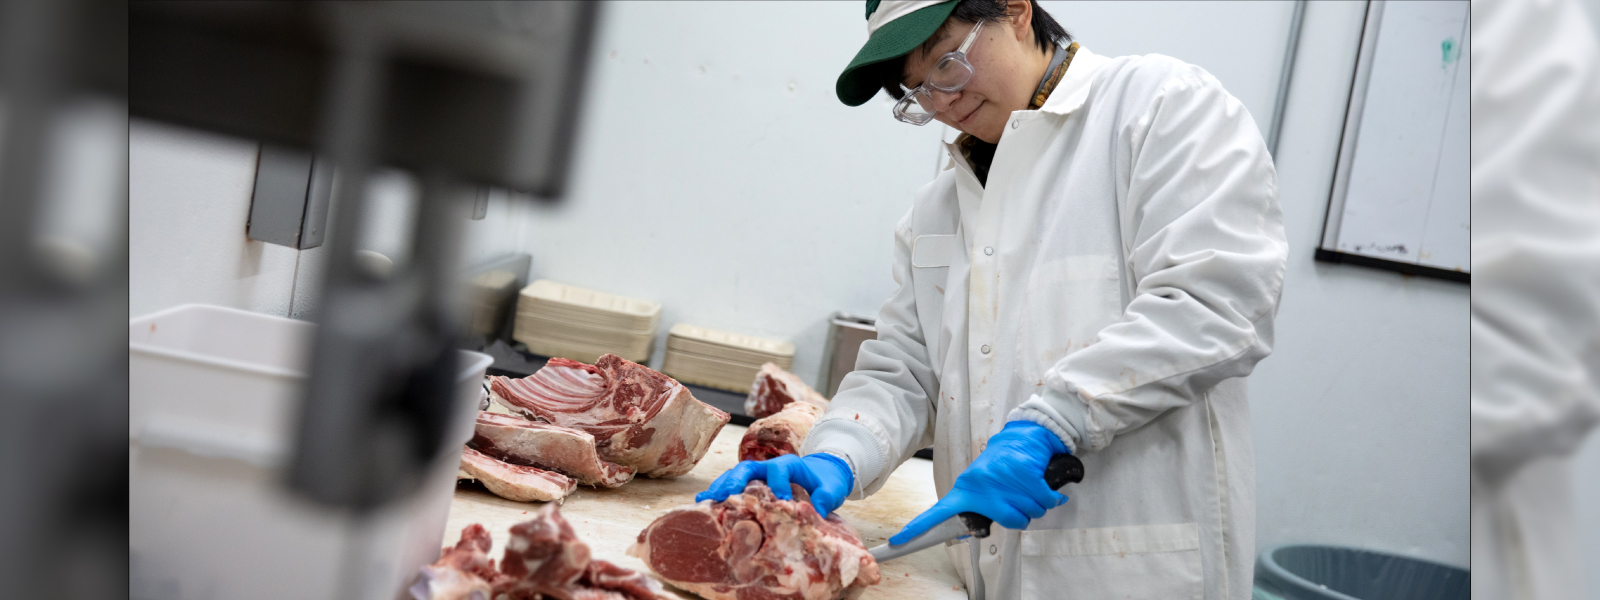 A staff member from Meat and Seafood cutting lamb